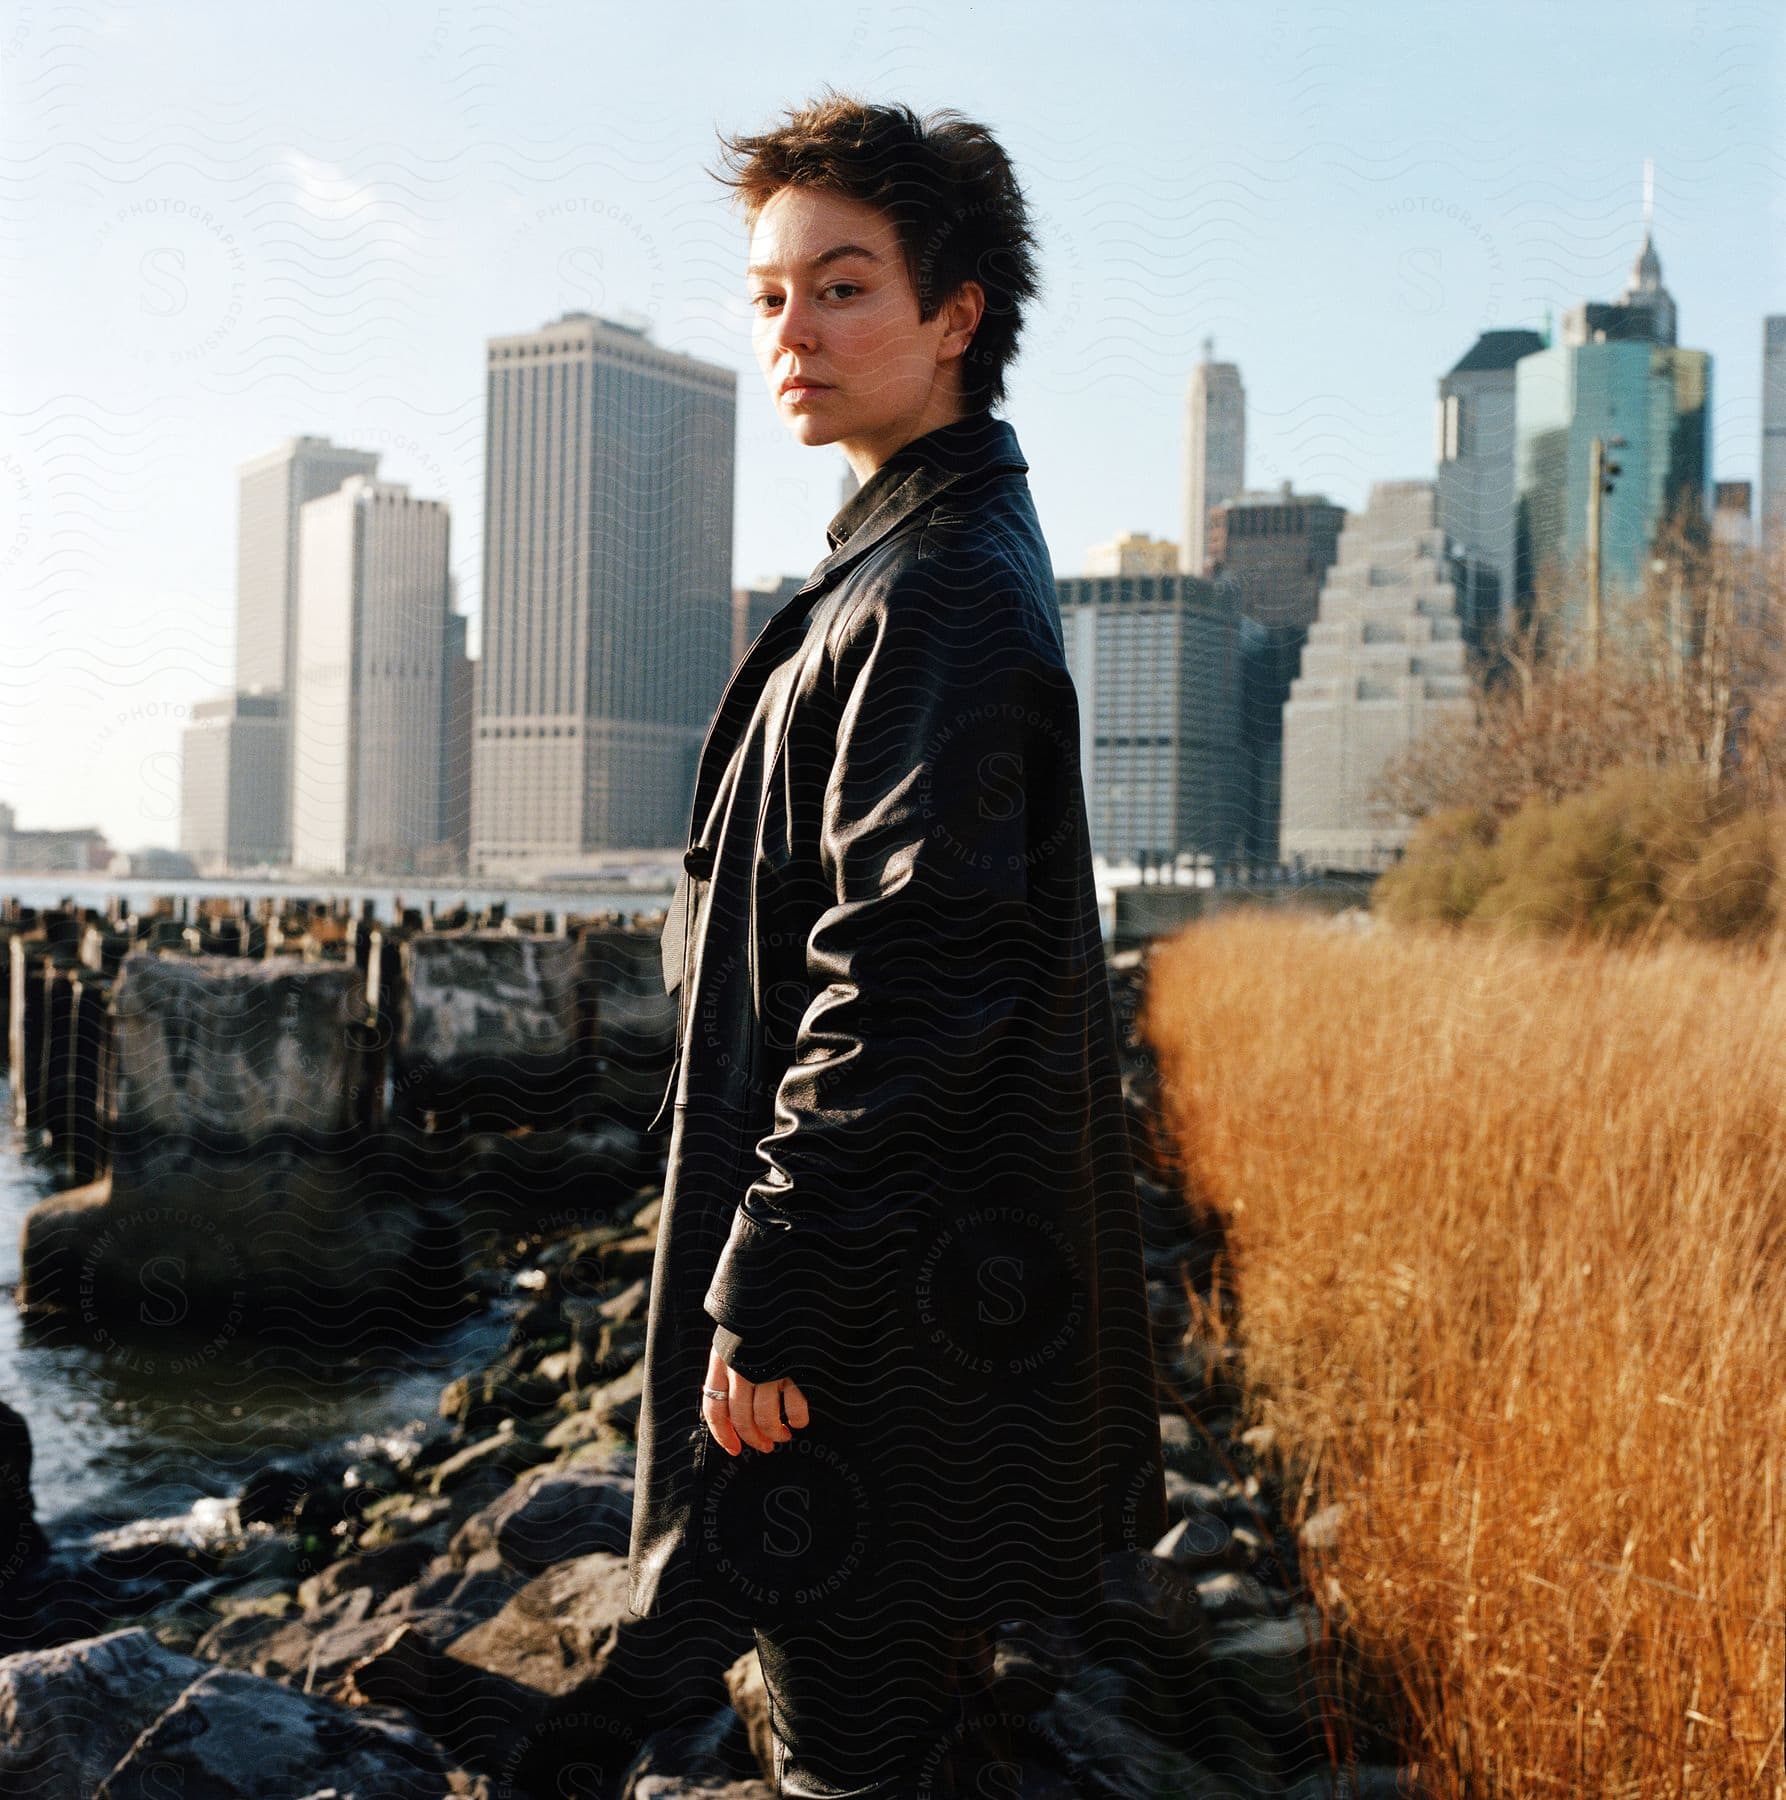 A person wearing a black leather jacket stands in front of a cityscape